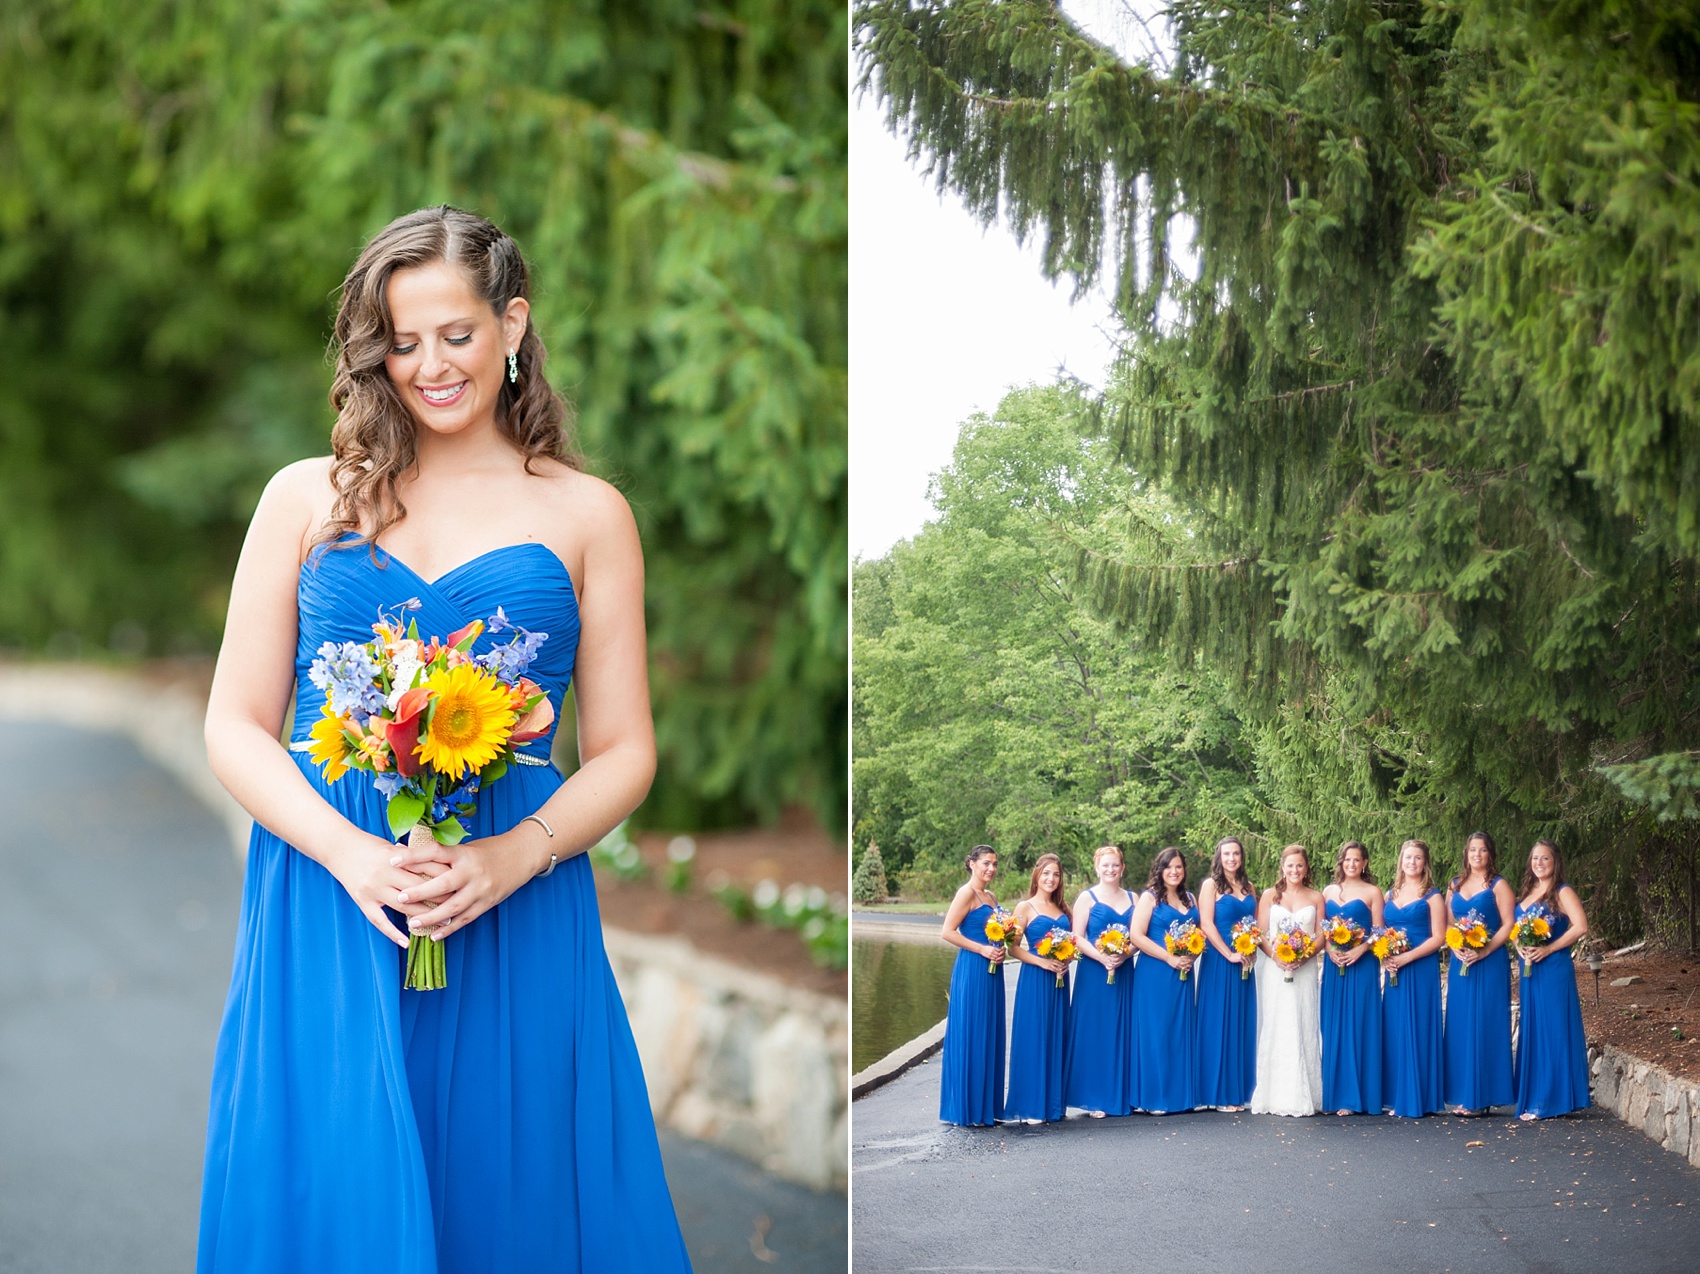 Perona Farms wedding photos cobalt blue bridesmaids for a colorful summer celebration. Pictures by New Jersey photographer Mikkel Paige Photography.